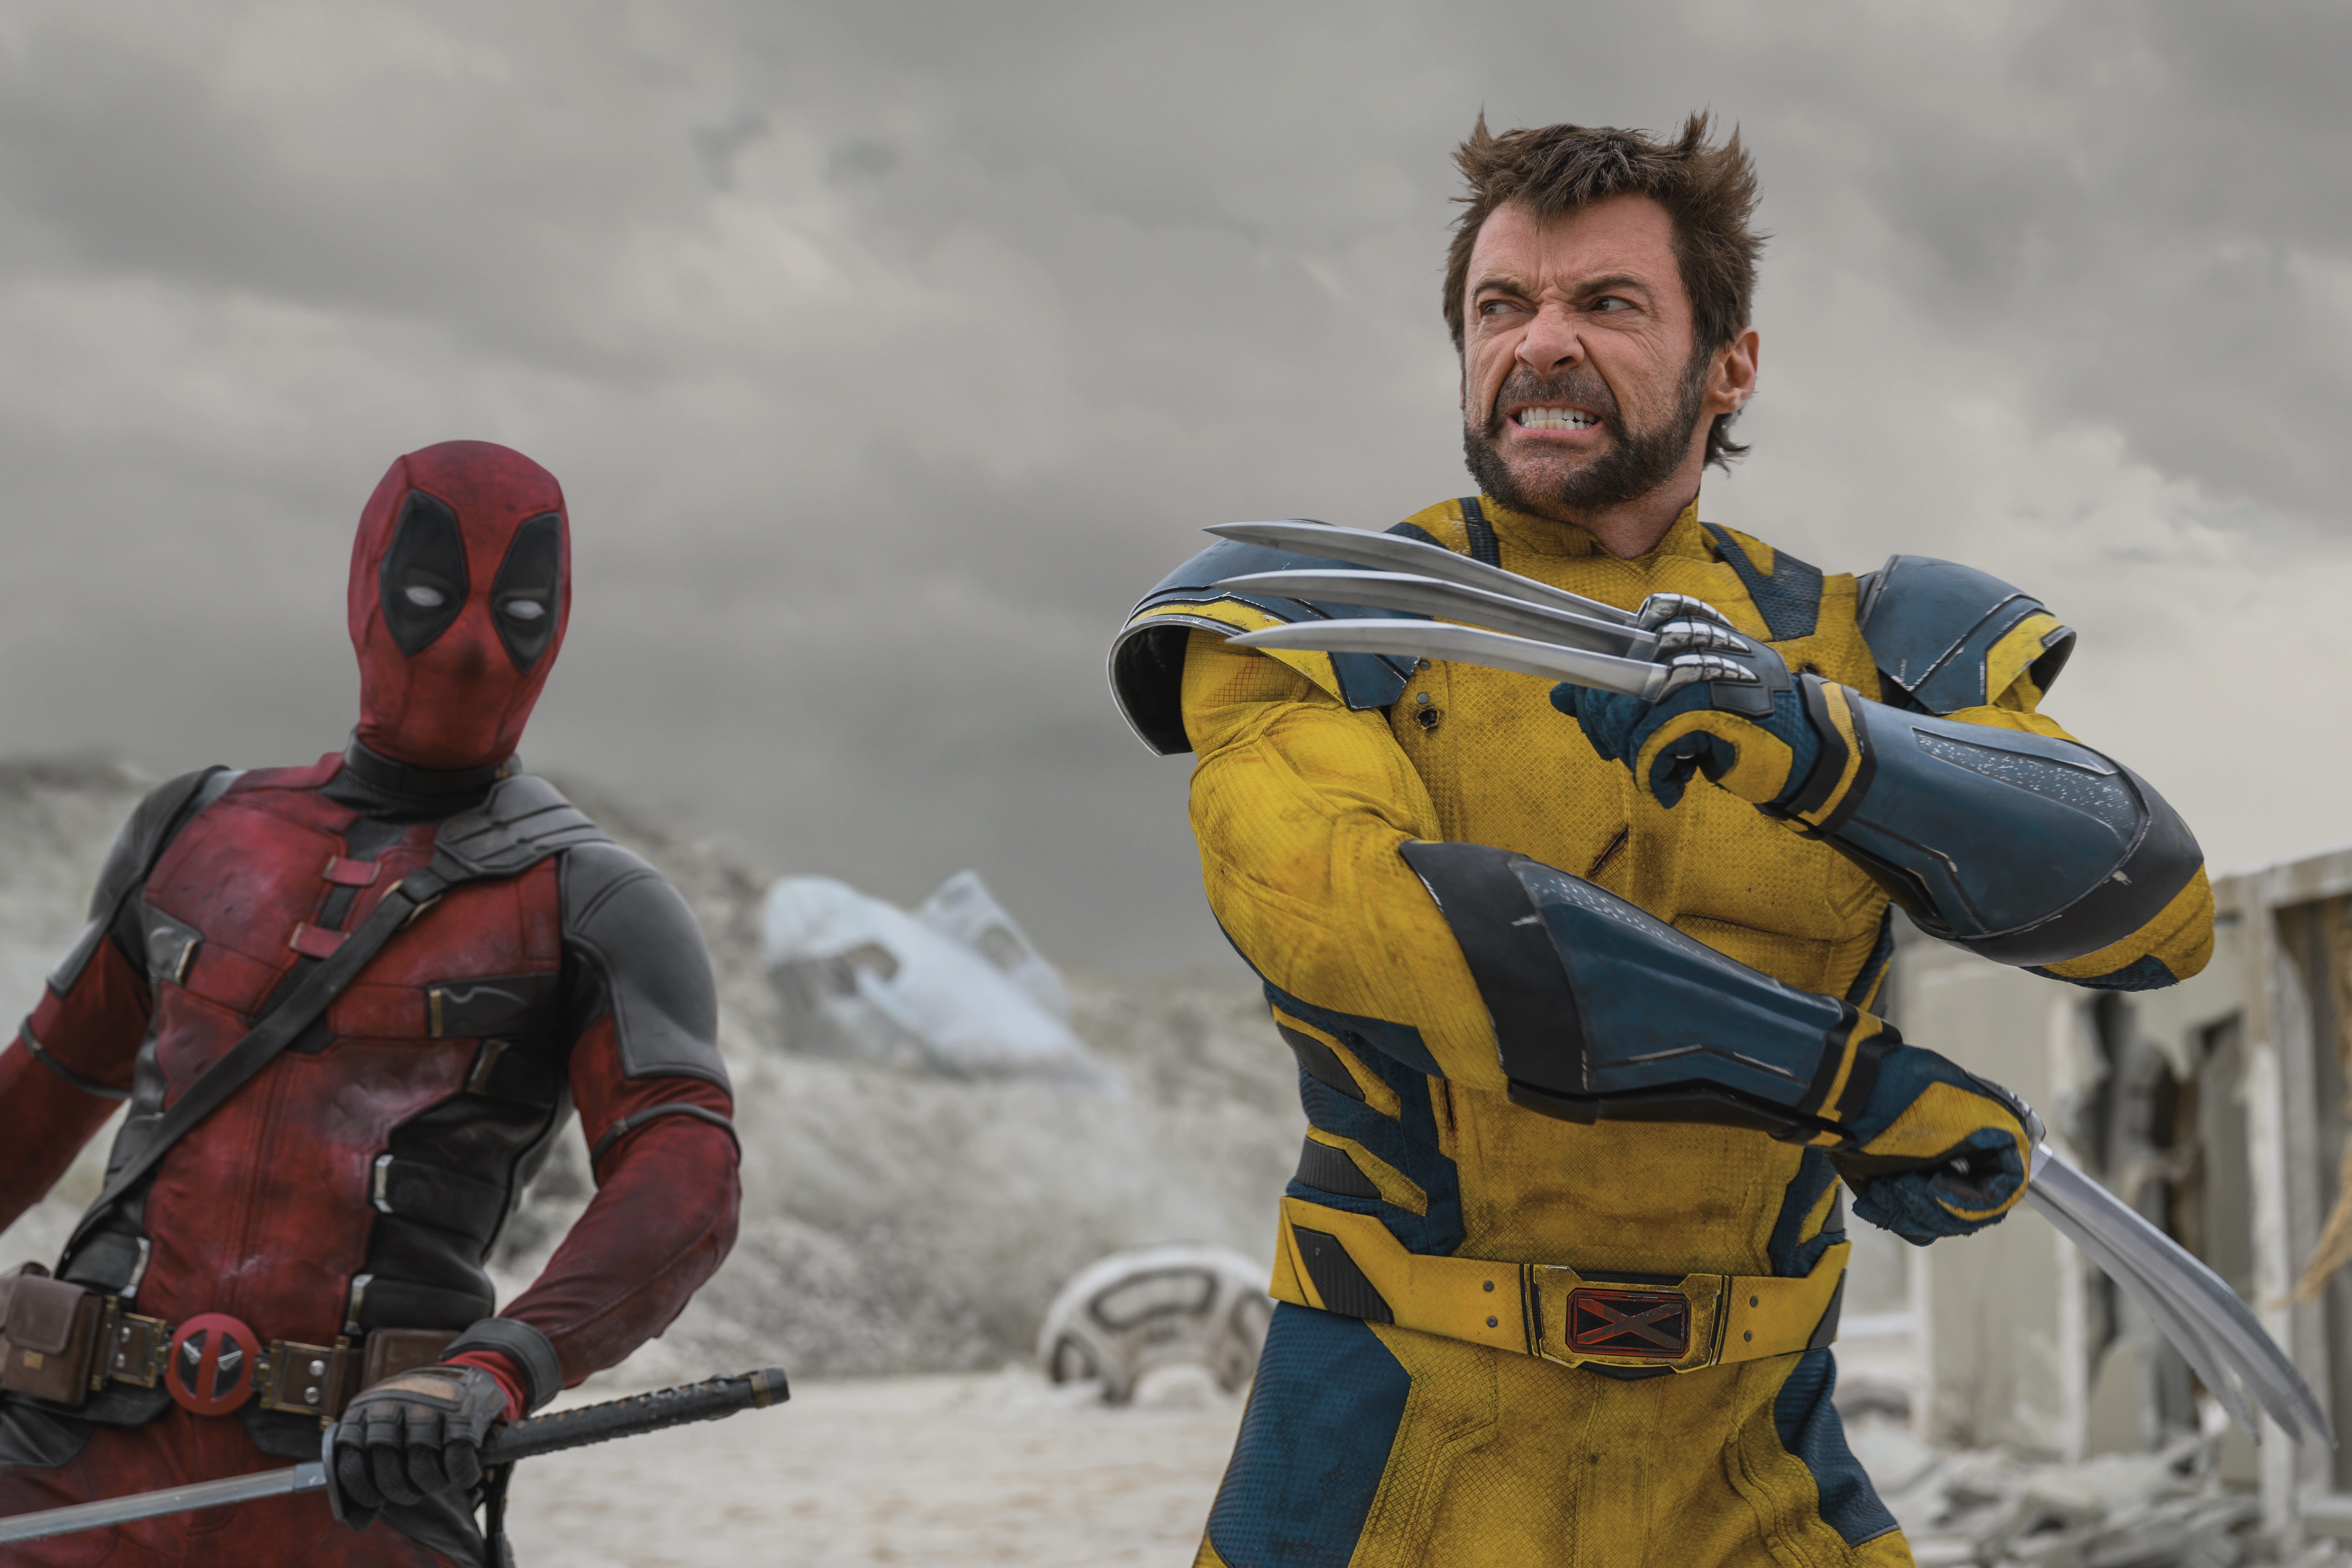 'Deadpool & Wolverine': What to know before you see the Marvel sequel